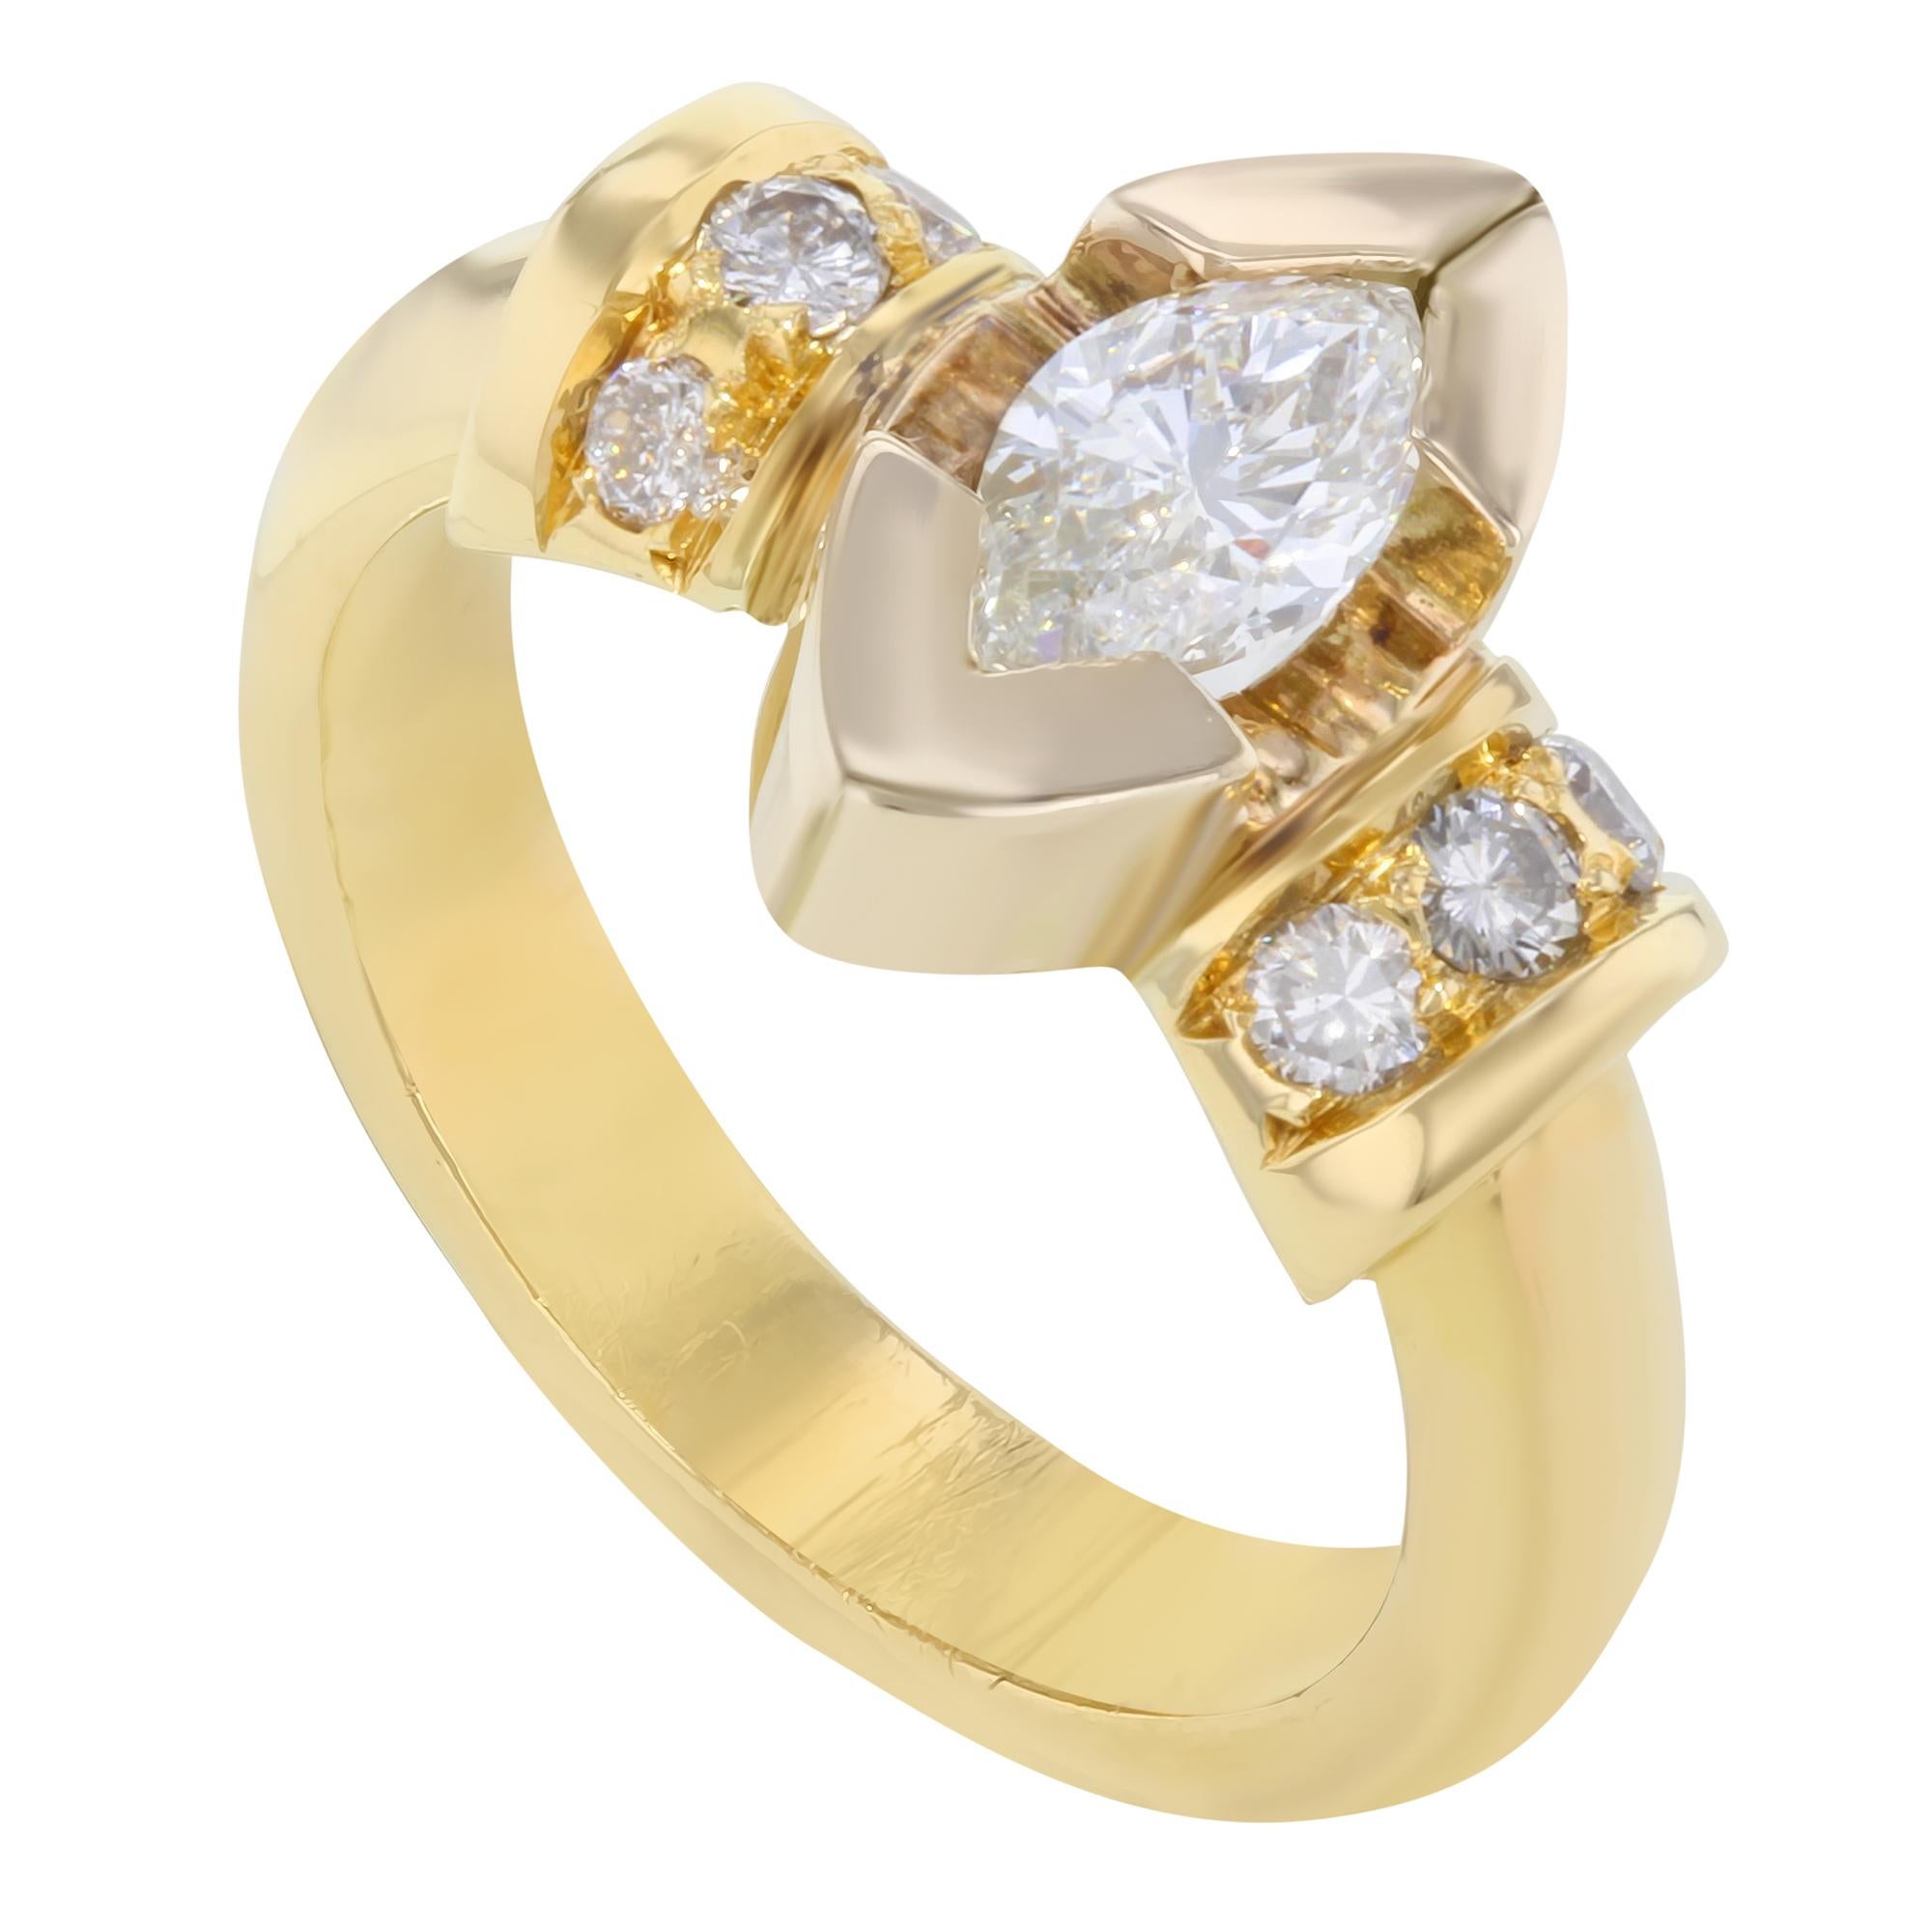 Classic and gorgeous, yellow gold marquise cut diamond engagement ring. This ring features a sparkling diamond in the center weighing 0.75ct in a half bezel setting and tiny round cut diamonds on each side giving a stunning vintage look. Total